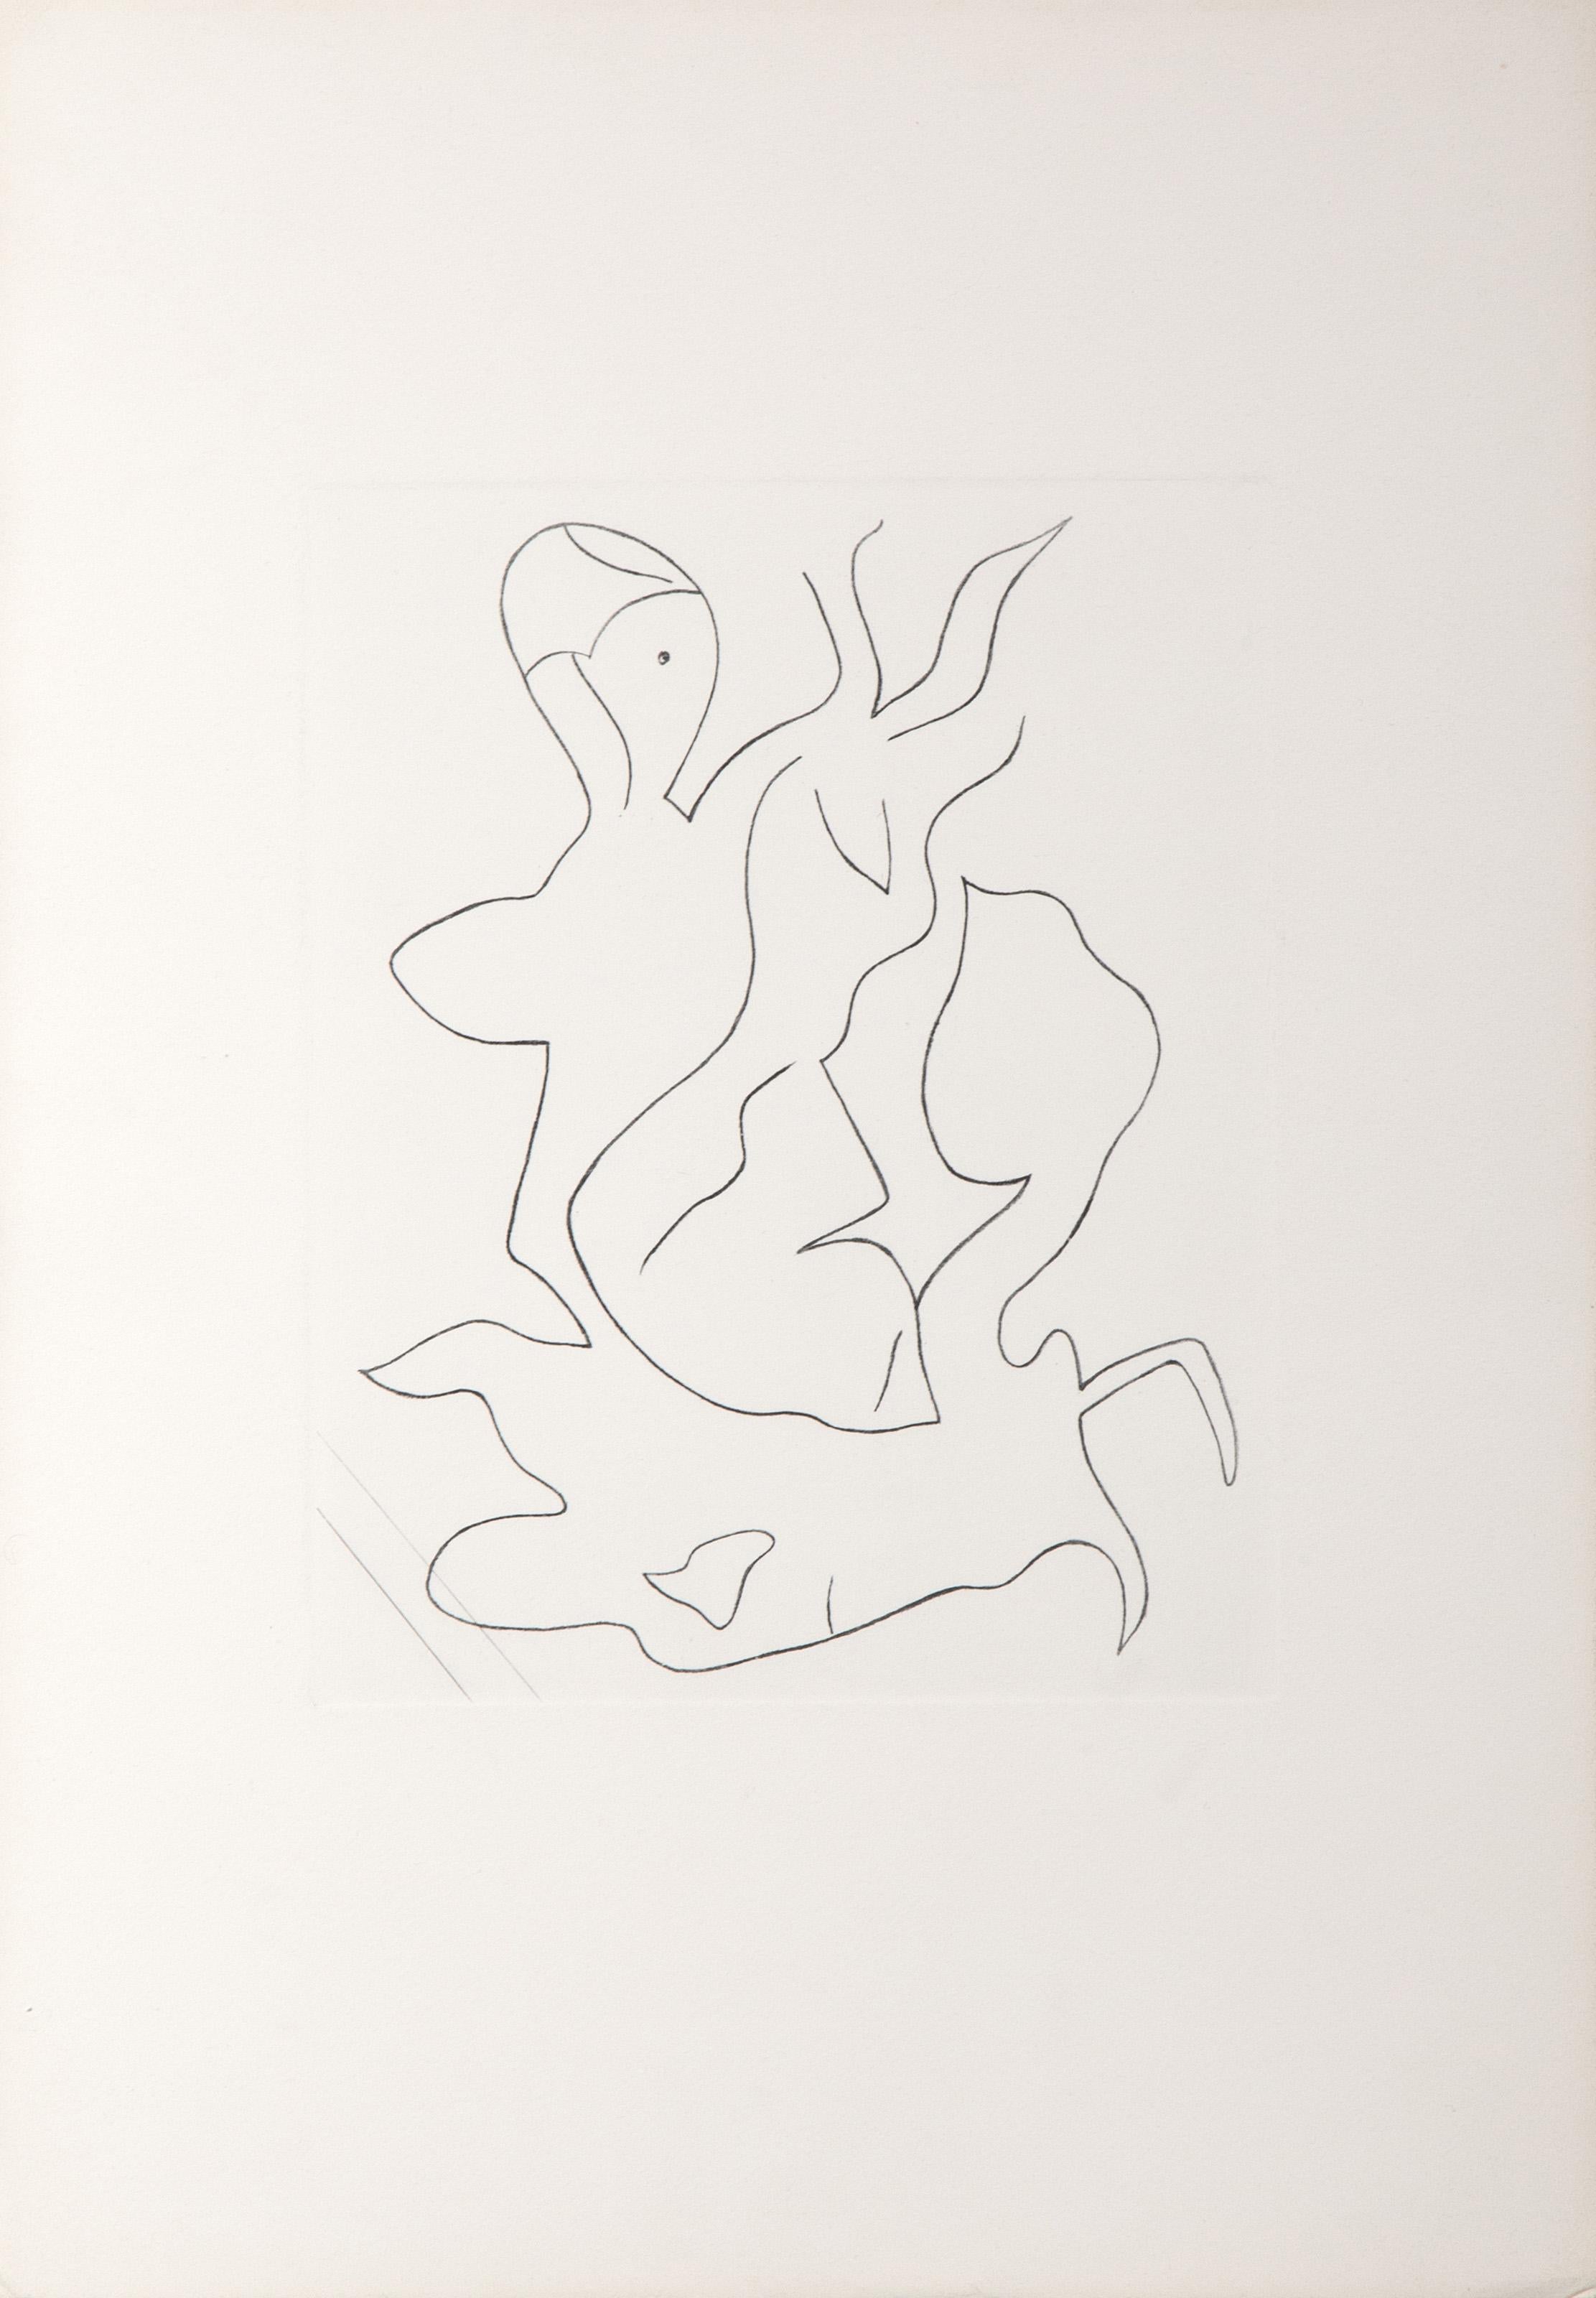 Paroles Peintes II
Jean Arp (After), French (1886–1966)
Date: 1965
Restrike Etching
Image Size: 10.25 x 8.75 inches
Size: 20 x 14 in. (50.8 x 35.56 cm)
Publisher: Collector's Guild, New York